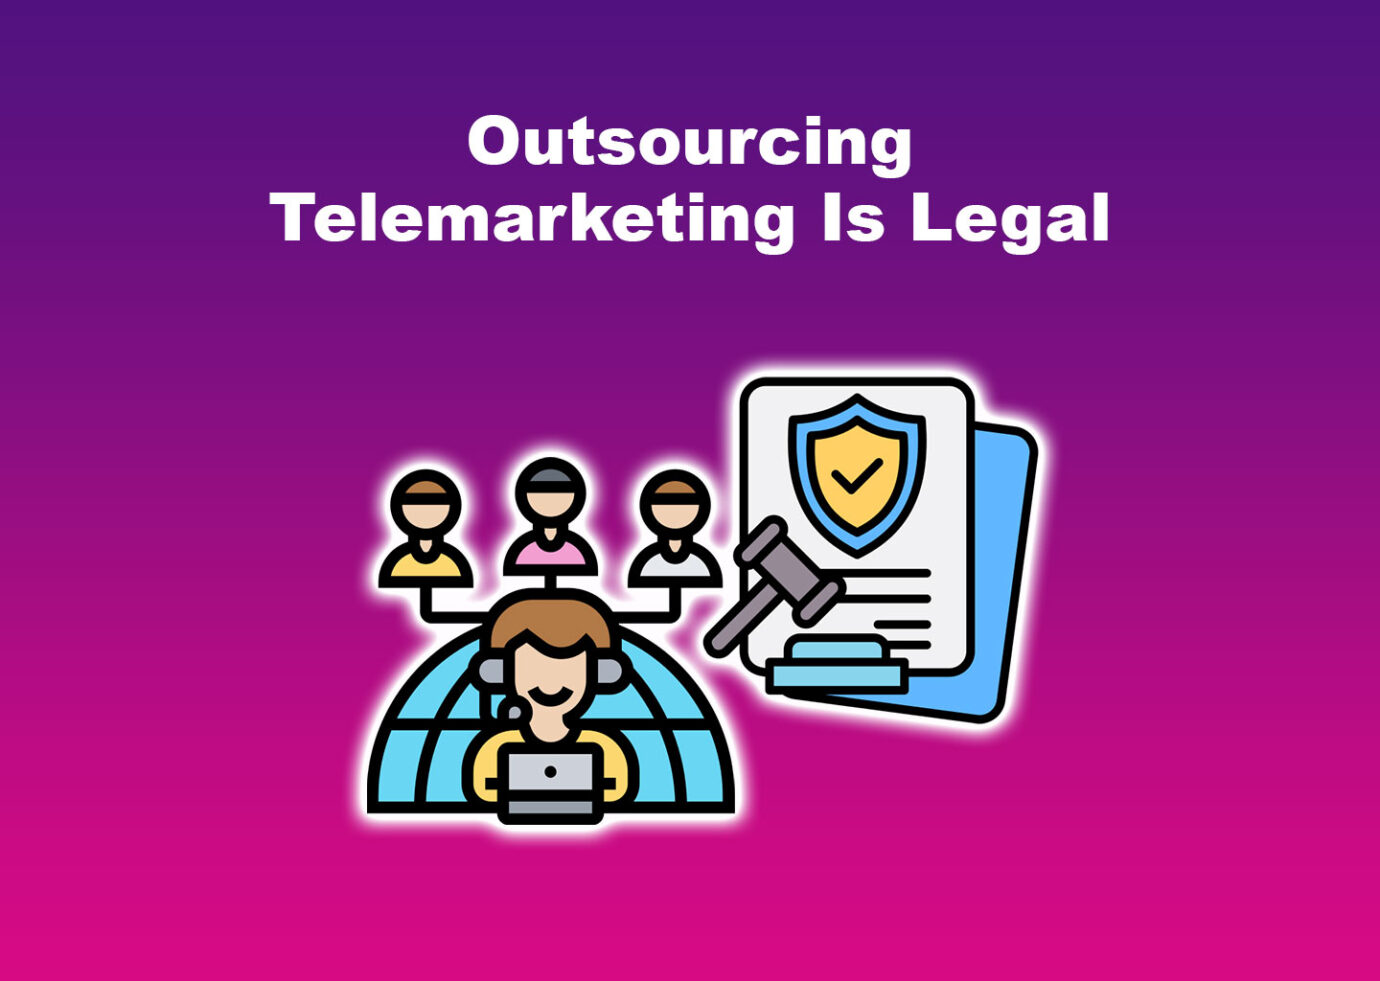 Outsourcing Telemarketing Is Legal